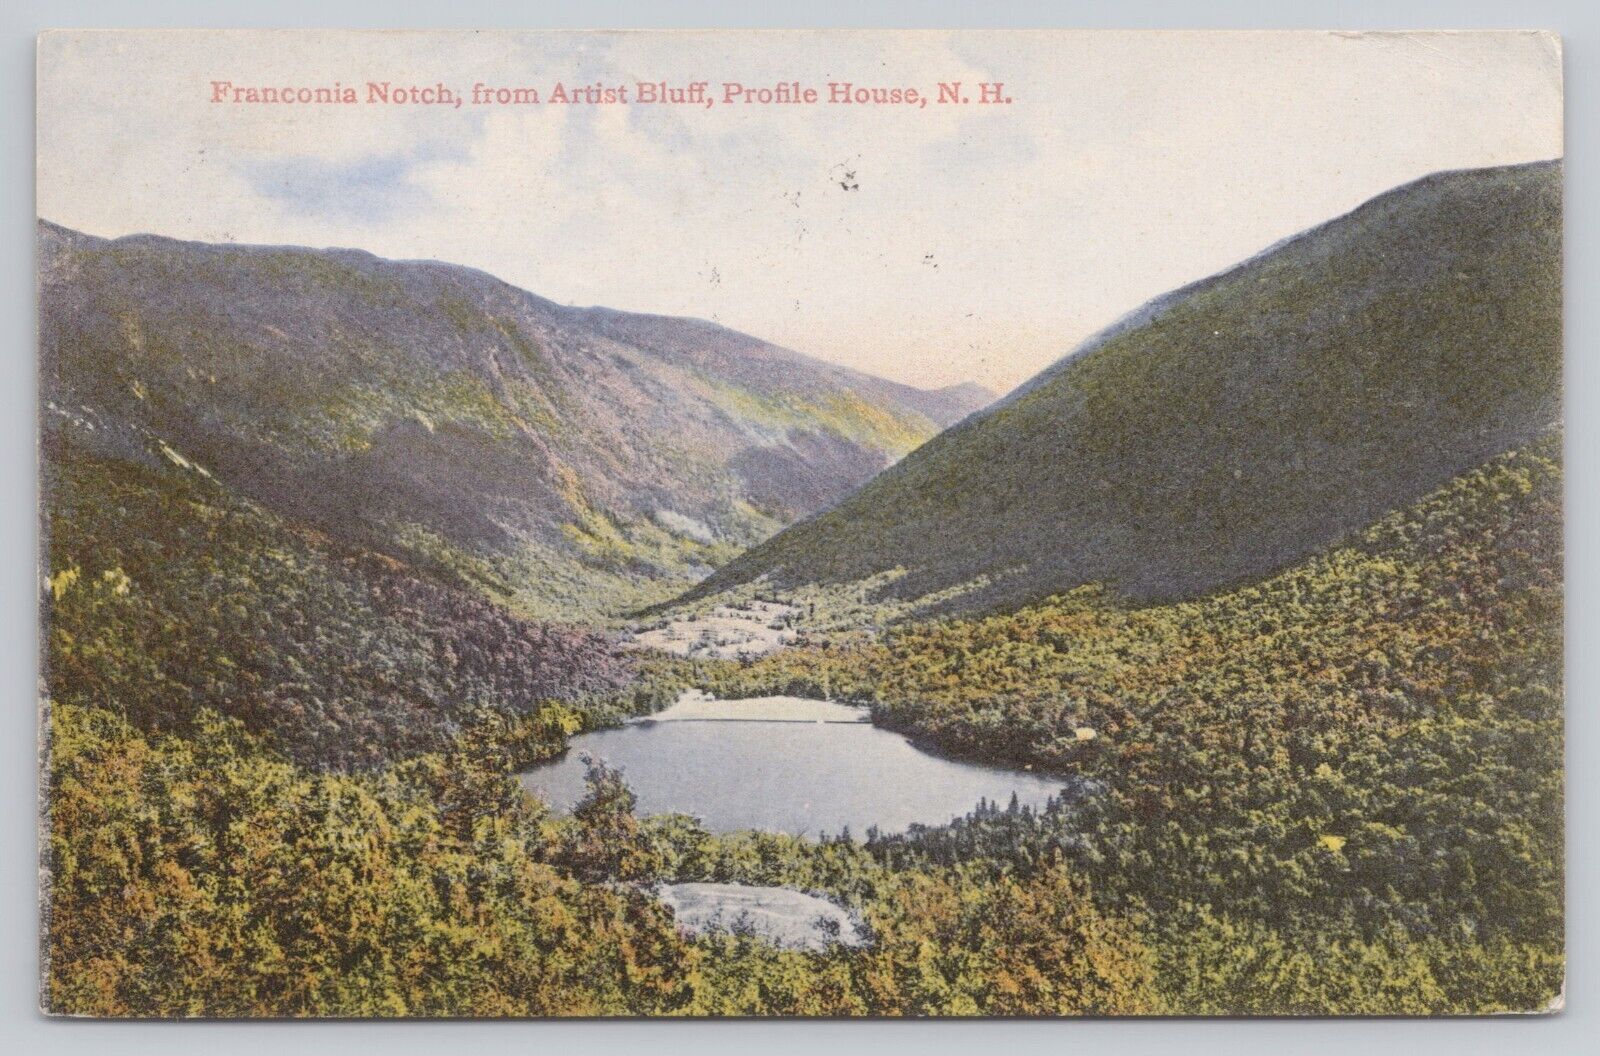 Franconia Notch New Hampshire, Profile House from Artist Bluff, Vintage Postcard